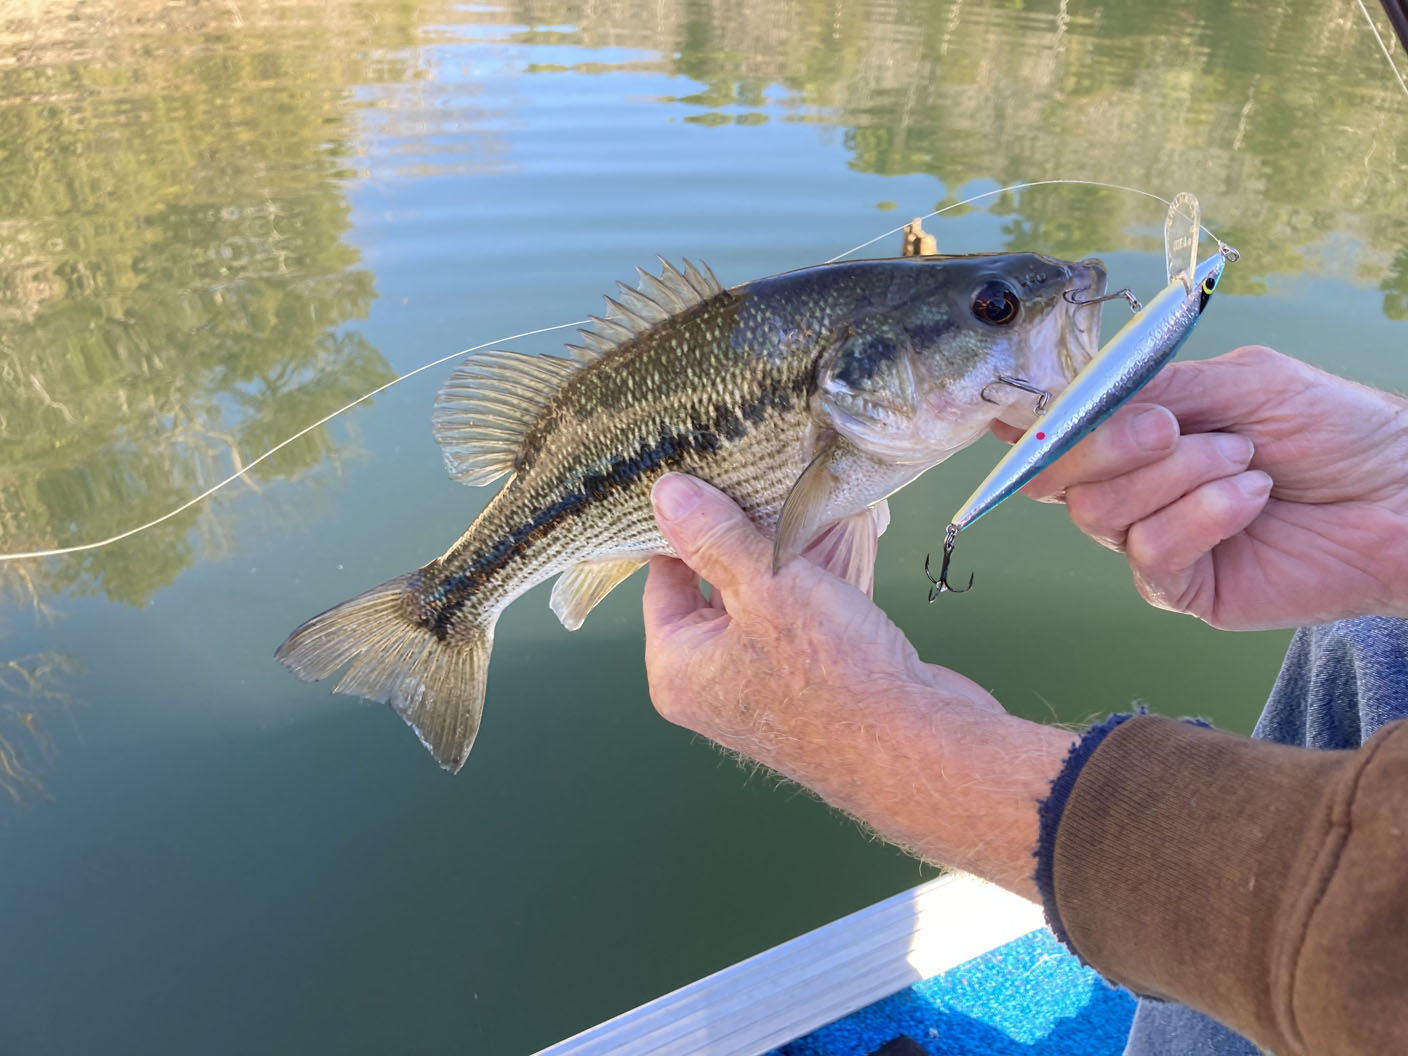 Quirky lure hot in cold water: Reel, stop, repeat puts fish in boat